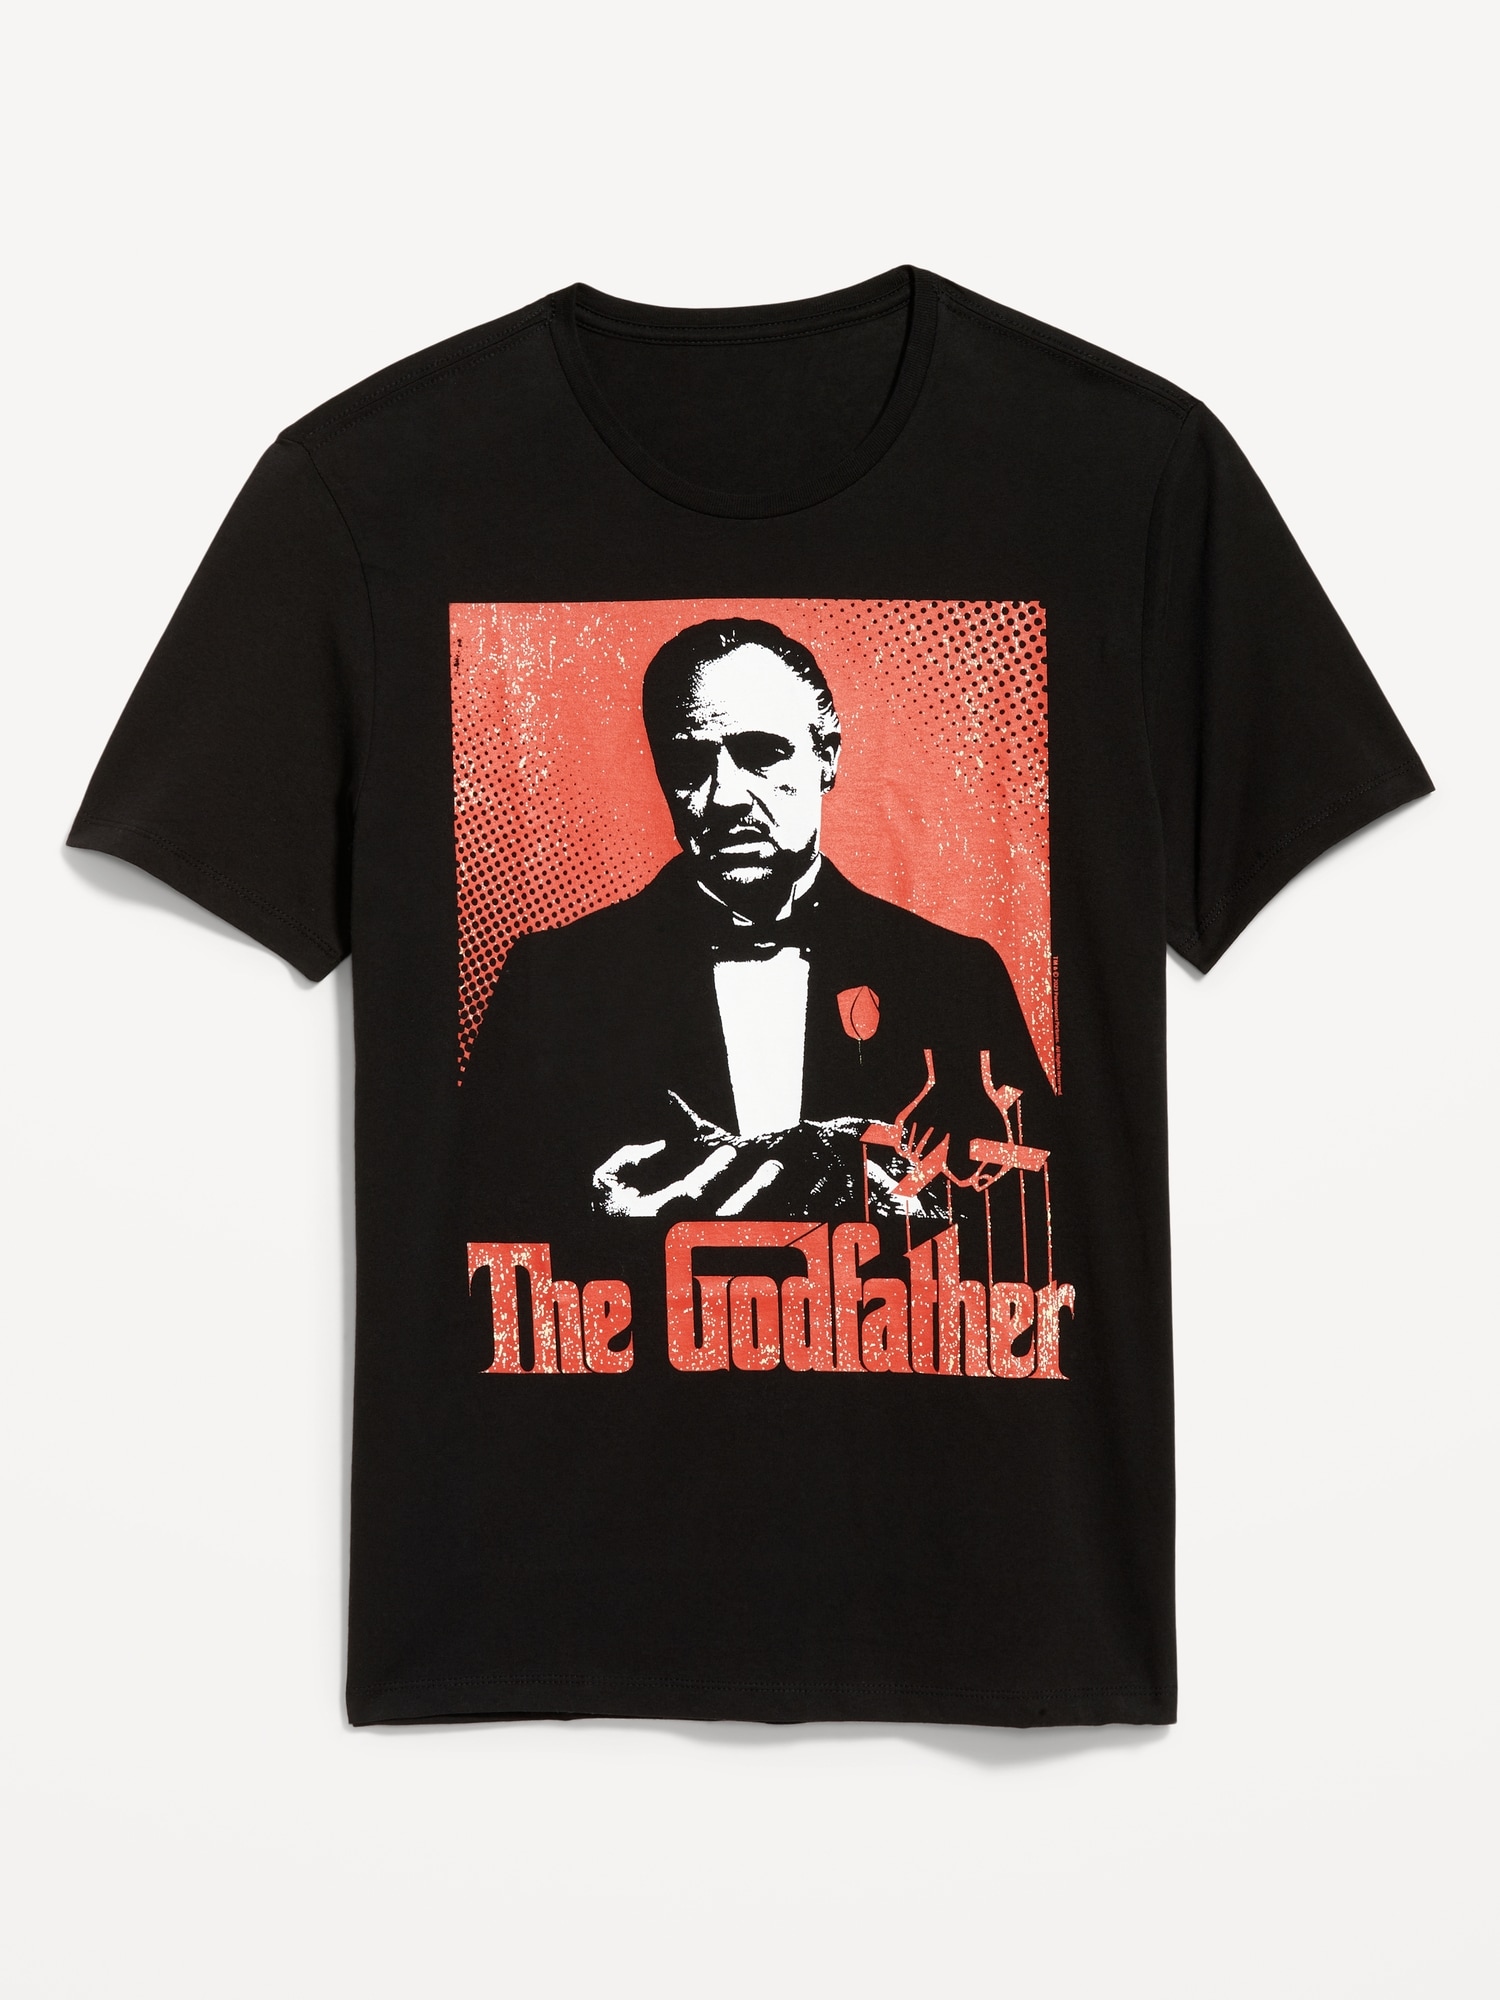 The Godfather™ Gender-Neutral T-Shirt for Adults